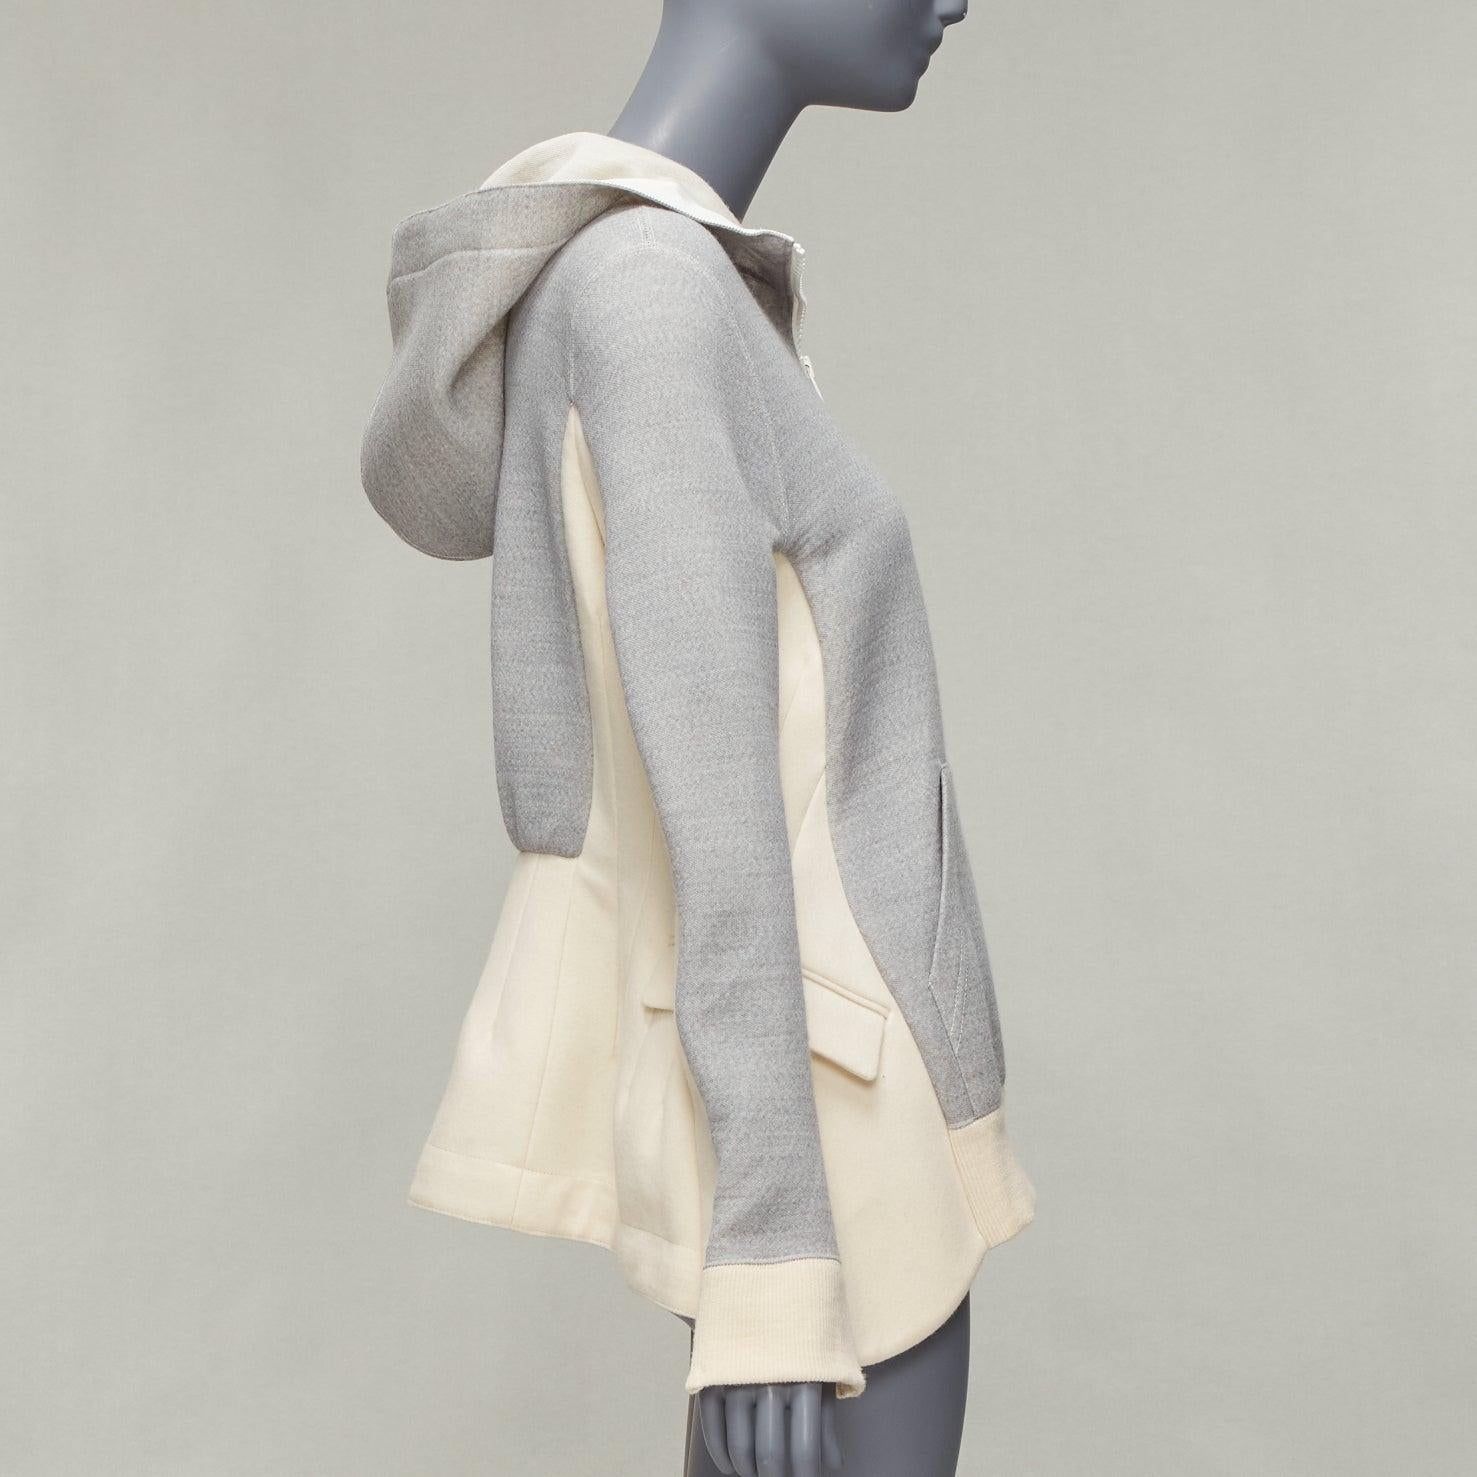 SACAI 2014 grey cream hybrid reconstructed flared back hoodie JP3 L
Reference: DYTG/A00031
Brand: Sacai
Designer: Chitose Abe
Collection: 2014
Material: Wool, Blend
Color: Grey, Cream
Pattern: Solid
Closure: Zip
Lining: White Fabric
Extra Details: